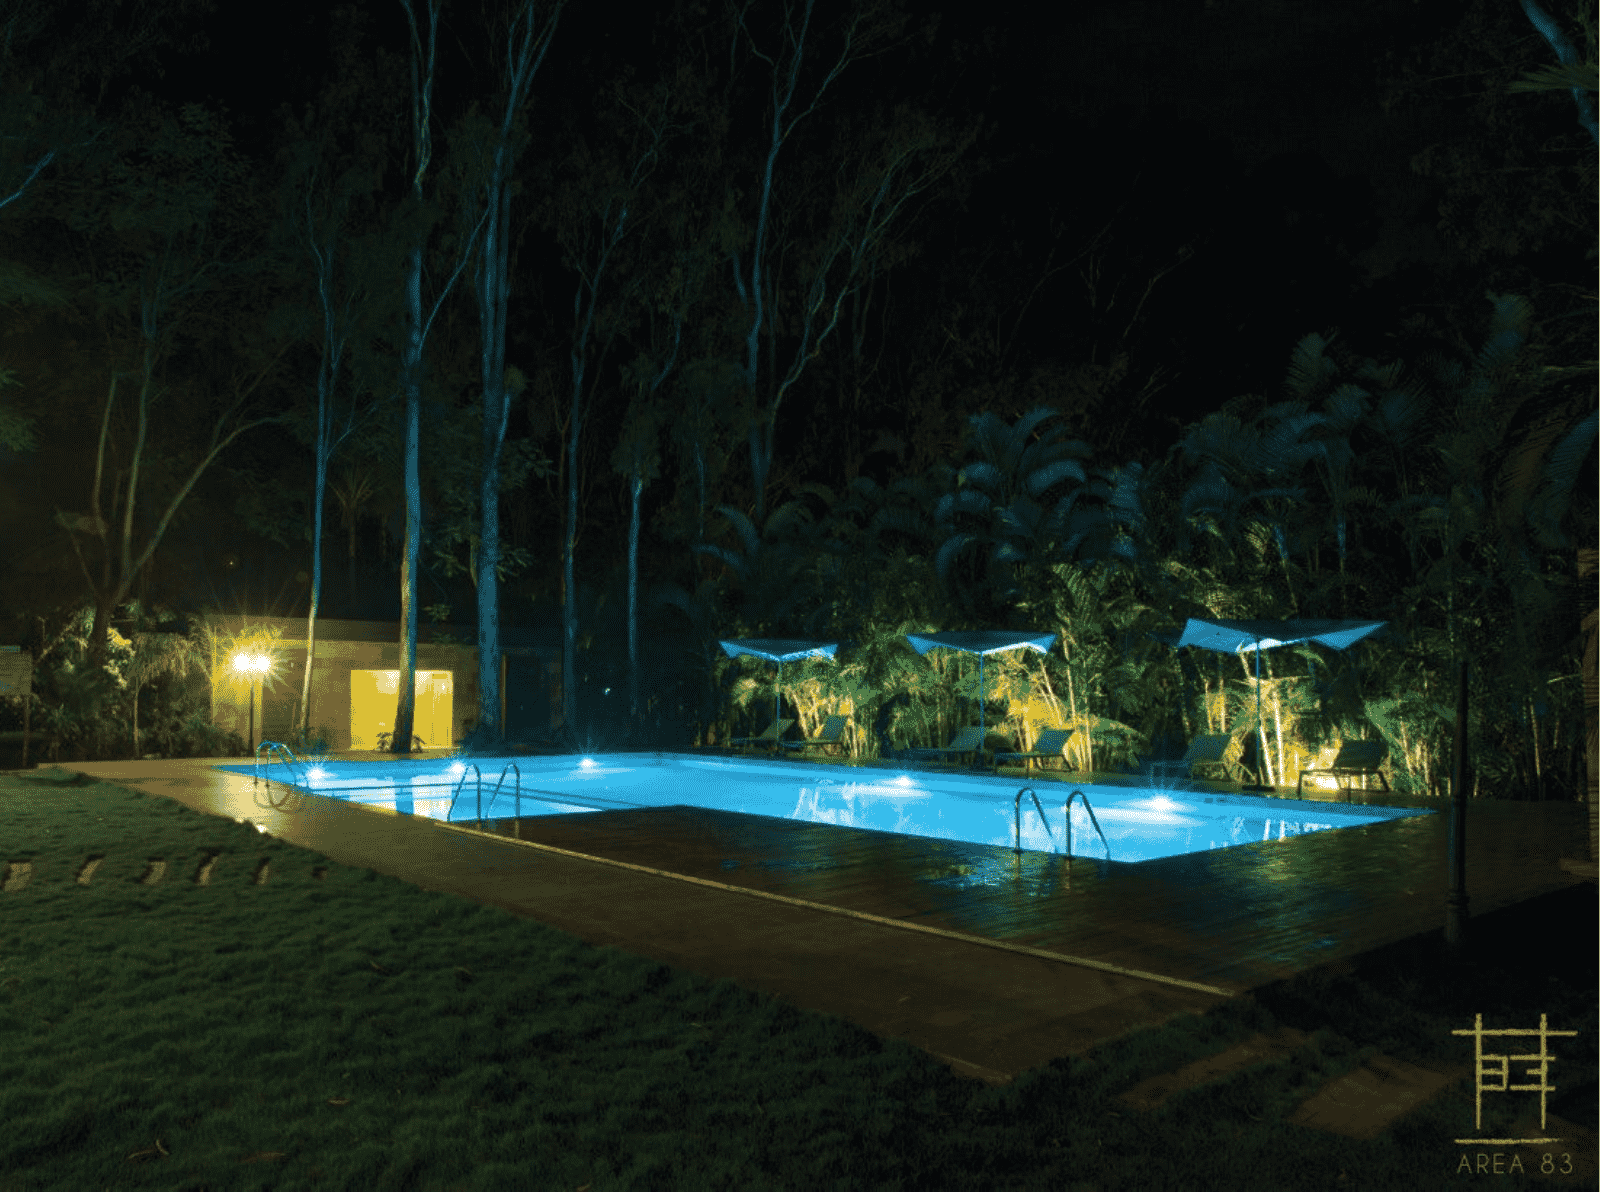 Luxury and Privacy Await at Area83: Best Resort with Private Pool in Bangalore